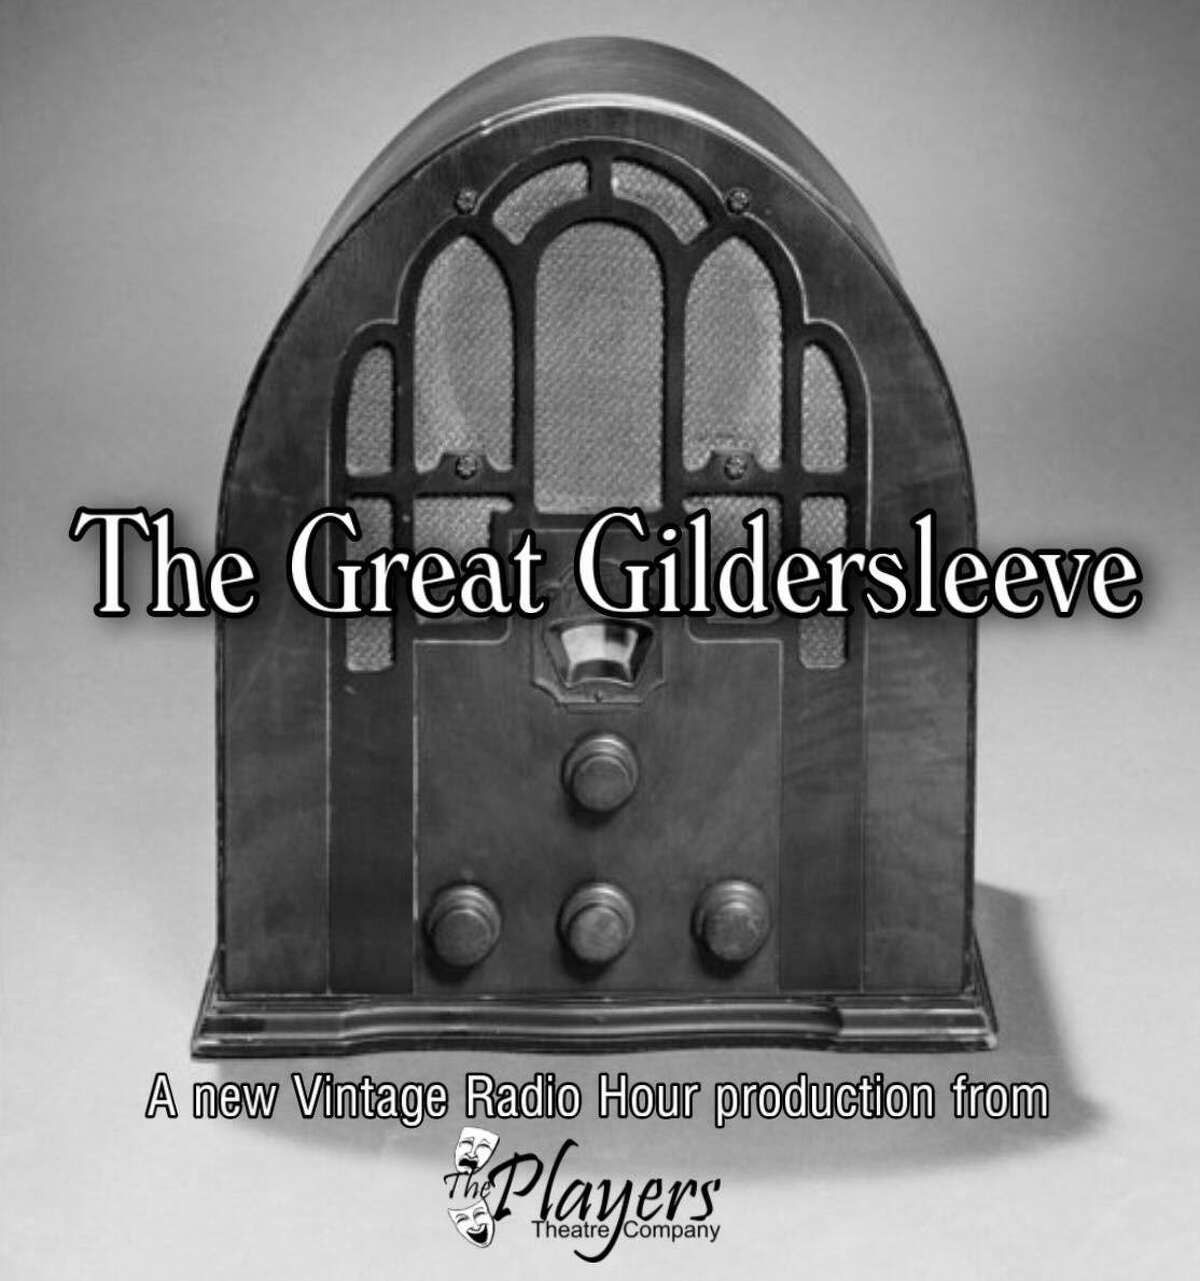 The Players Theatre Company is putting together a "Vintage Radio Hour" production called "The Great Gildersleeve." Auditions took place this week and the show will be posted on The Players Facebook page on or before June 12.